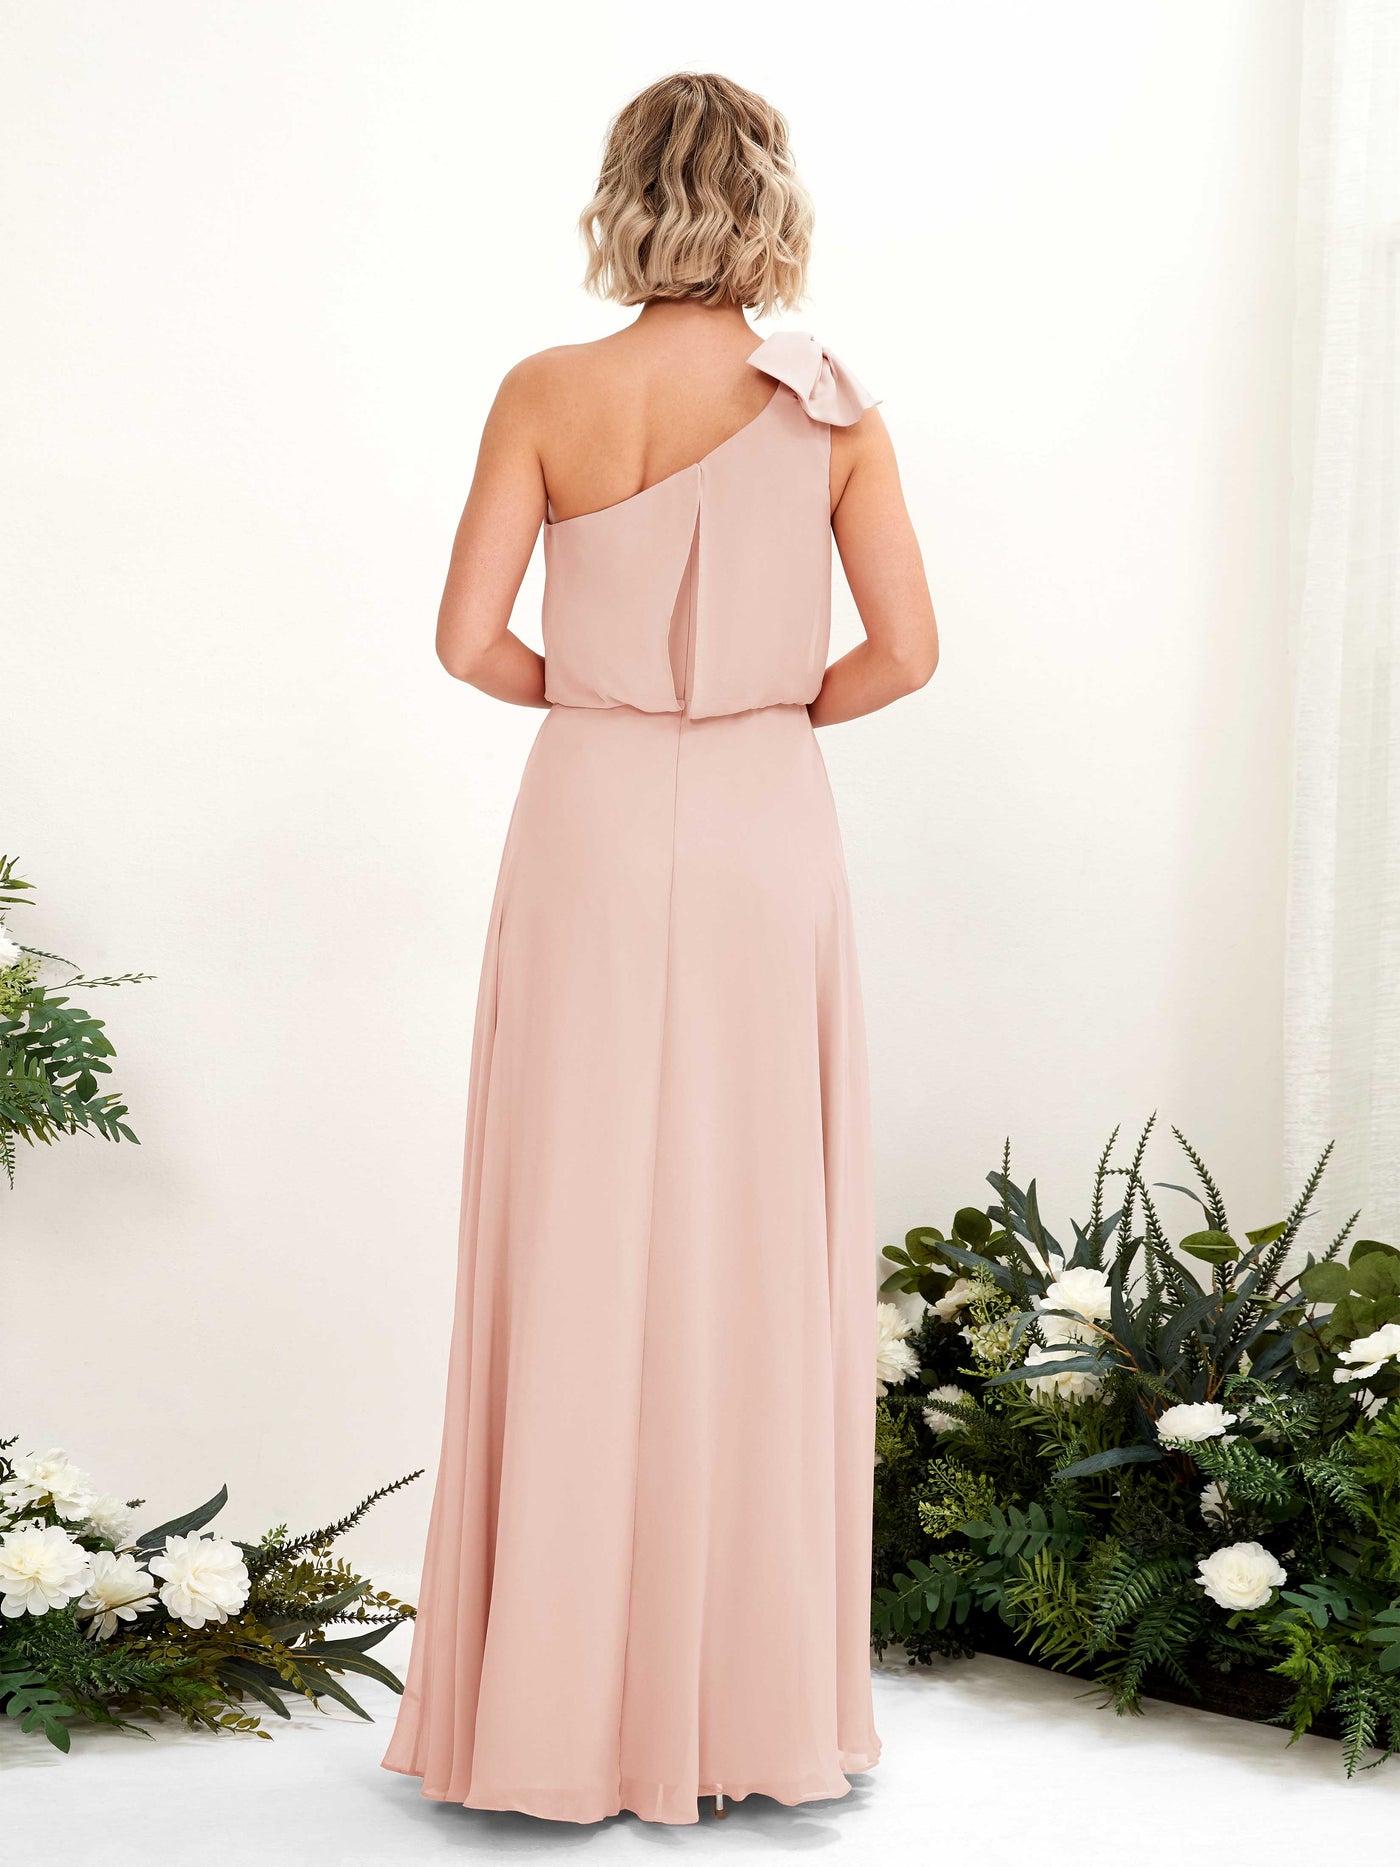 Pearl Pink Bridesmaid Dresses Bridesmaid Dress A-line Chiffon One Shoulder Full Length Sleeveless Wedding Party Dress (81225508)#color_pearl-pink